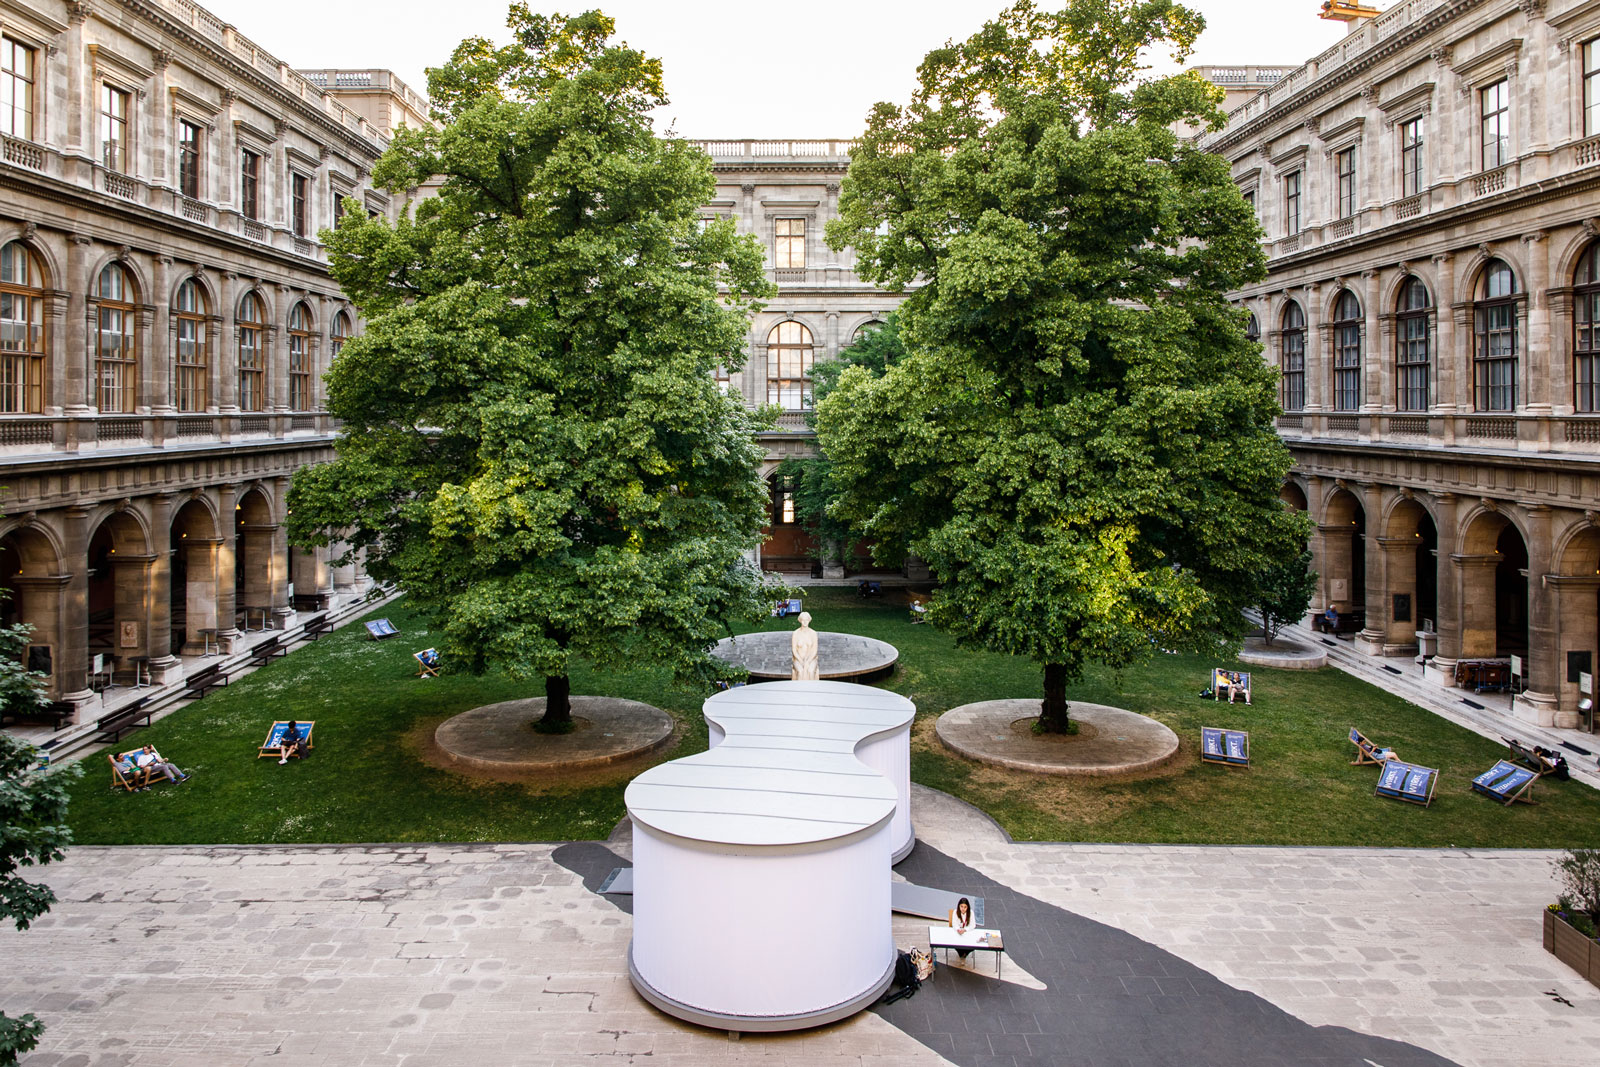 Lateral bird's eye view of the inner courtyard of the University of Vienna with exhibition pavilion, trees and building